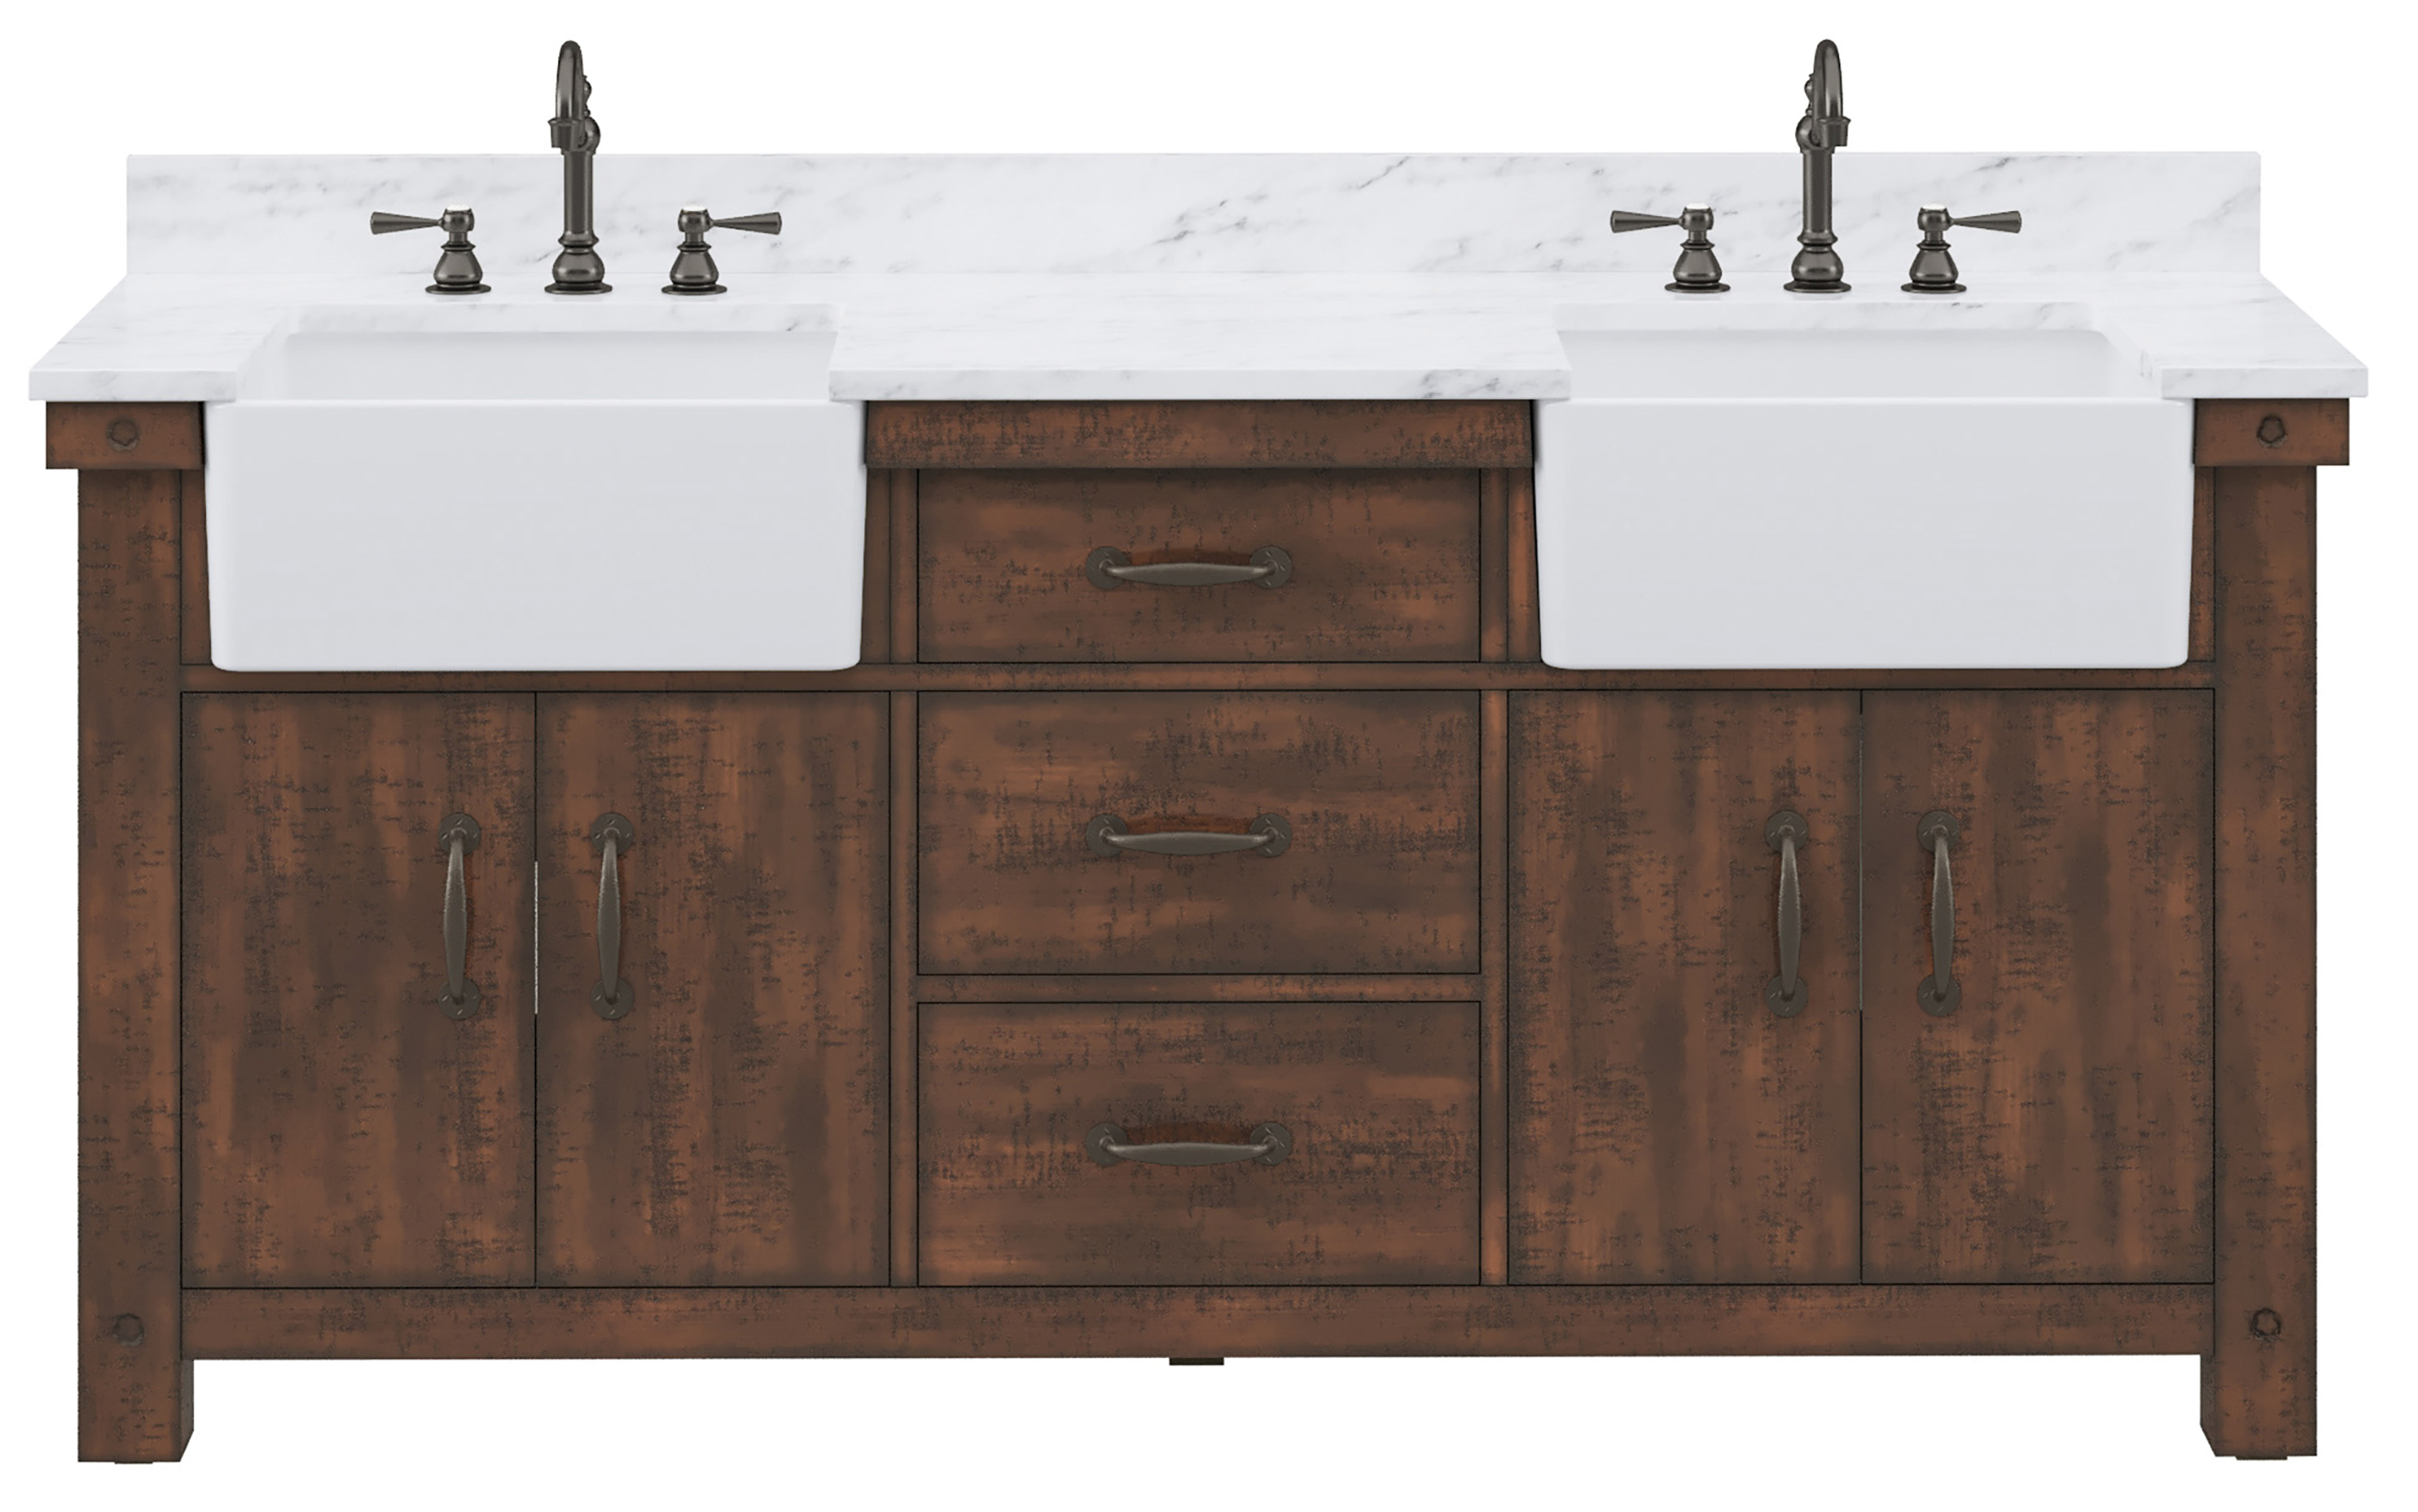 72" Double Sink Carrara White Marble Countertop Vanity in Rustic Sienna with Mirror and Faucet Options